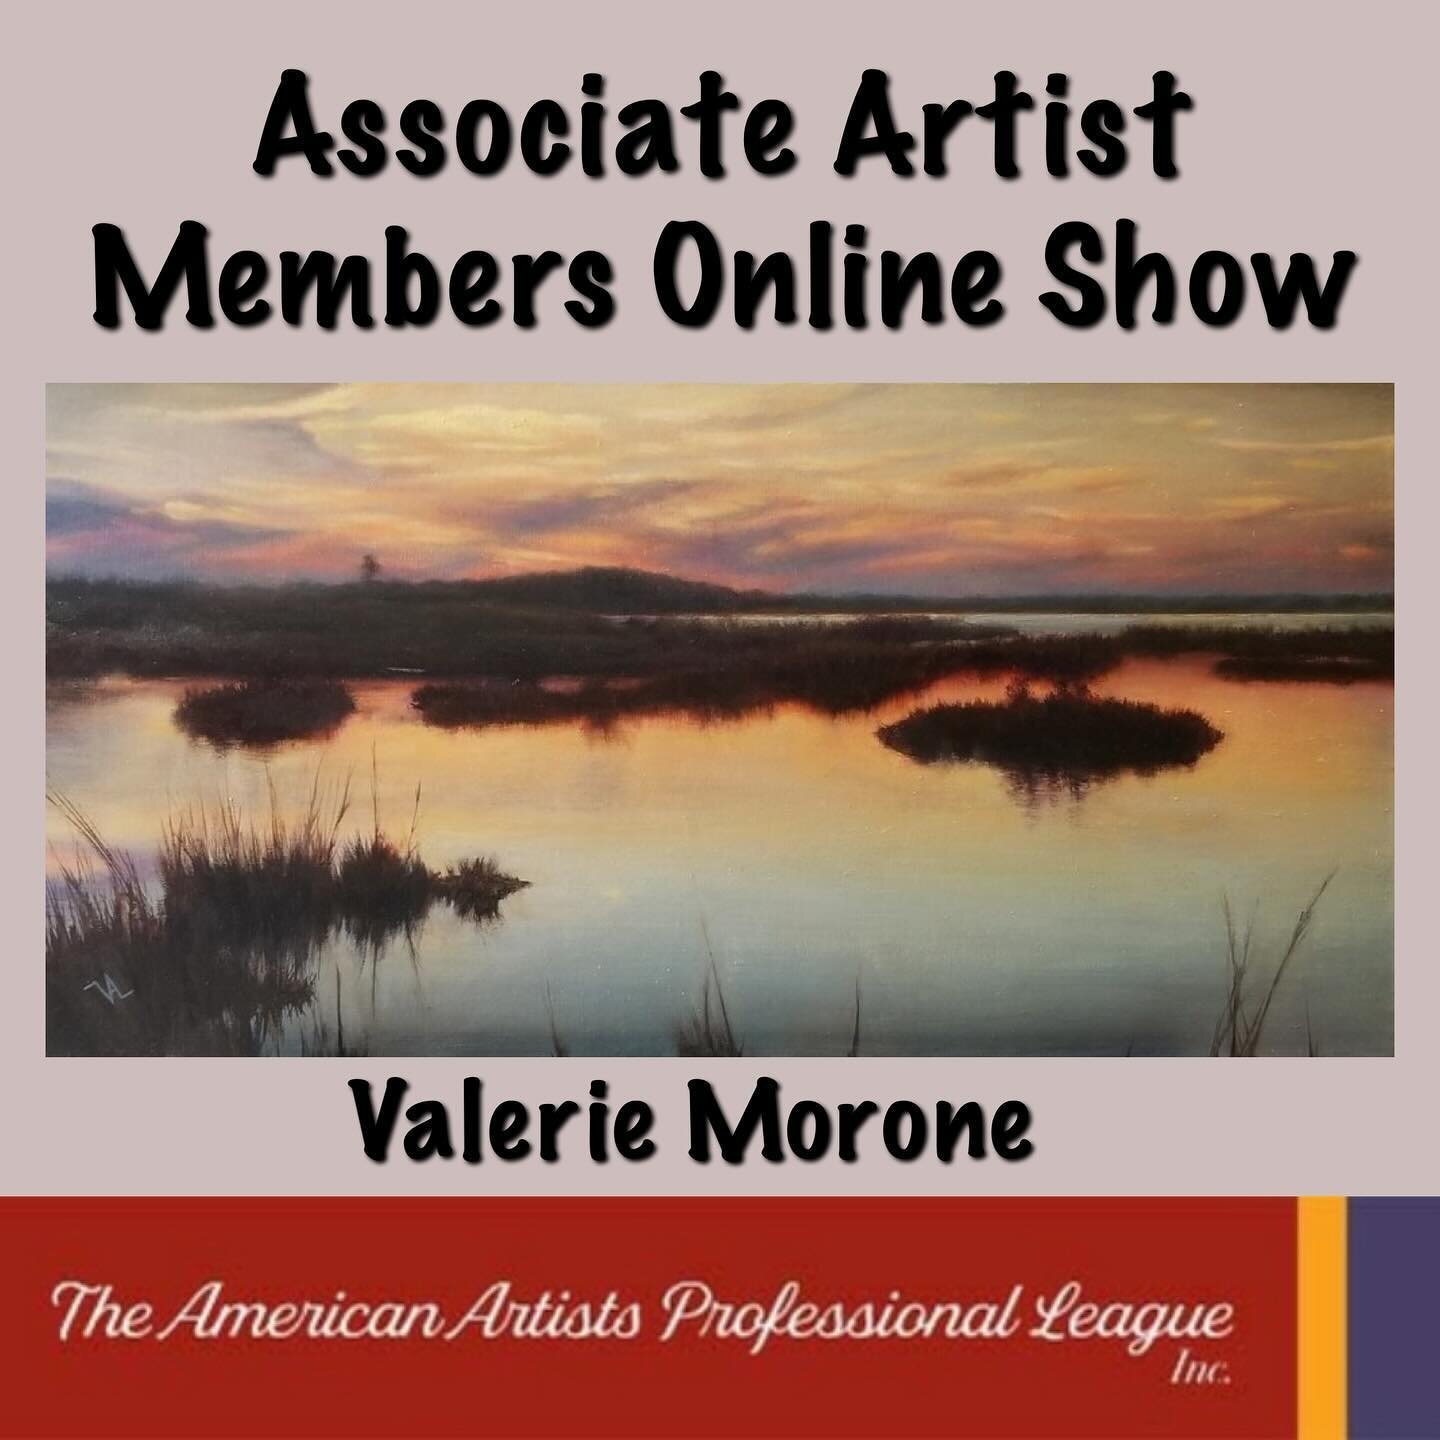 Artist Spotlight in The Associate On Line Show!  Today The American Artist Professional League proudly presents Valerie Moron&rsquo;s &ldquo;Islands in the Sky 2&rdquo;. It is part of the online show and is for sale at $850. 

  Valerie has been draw